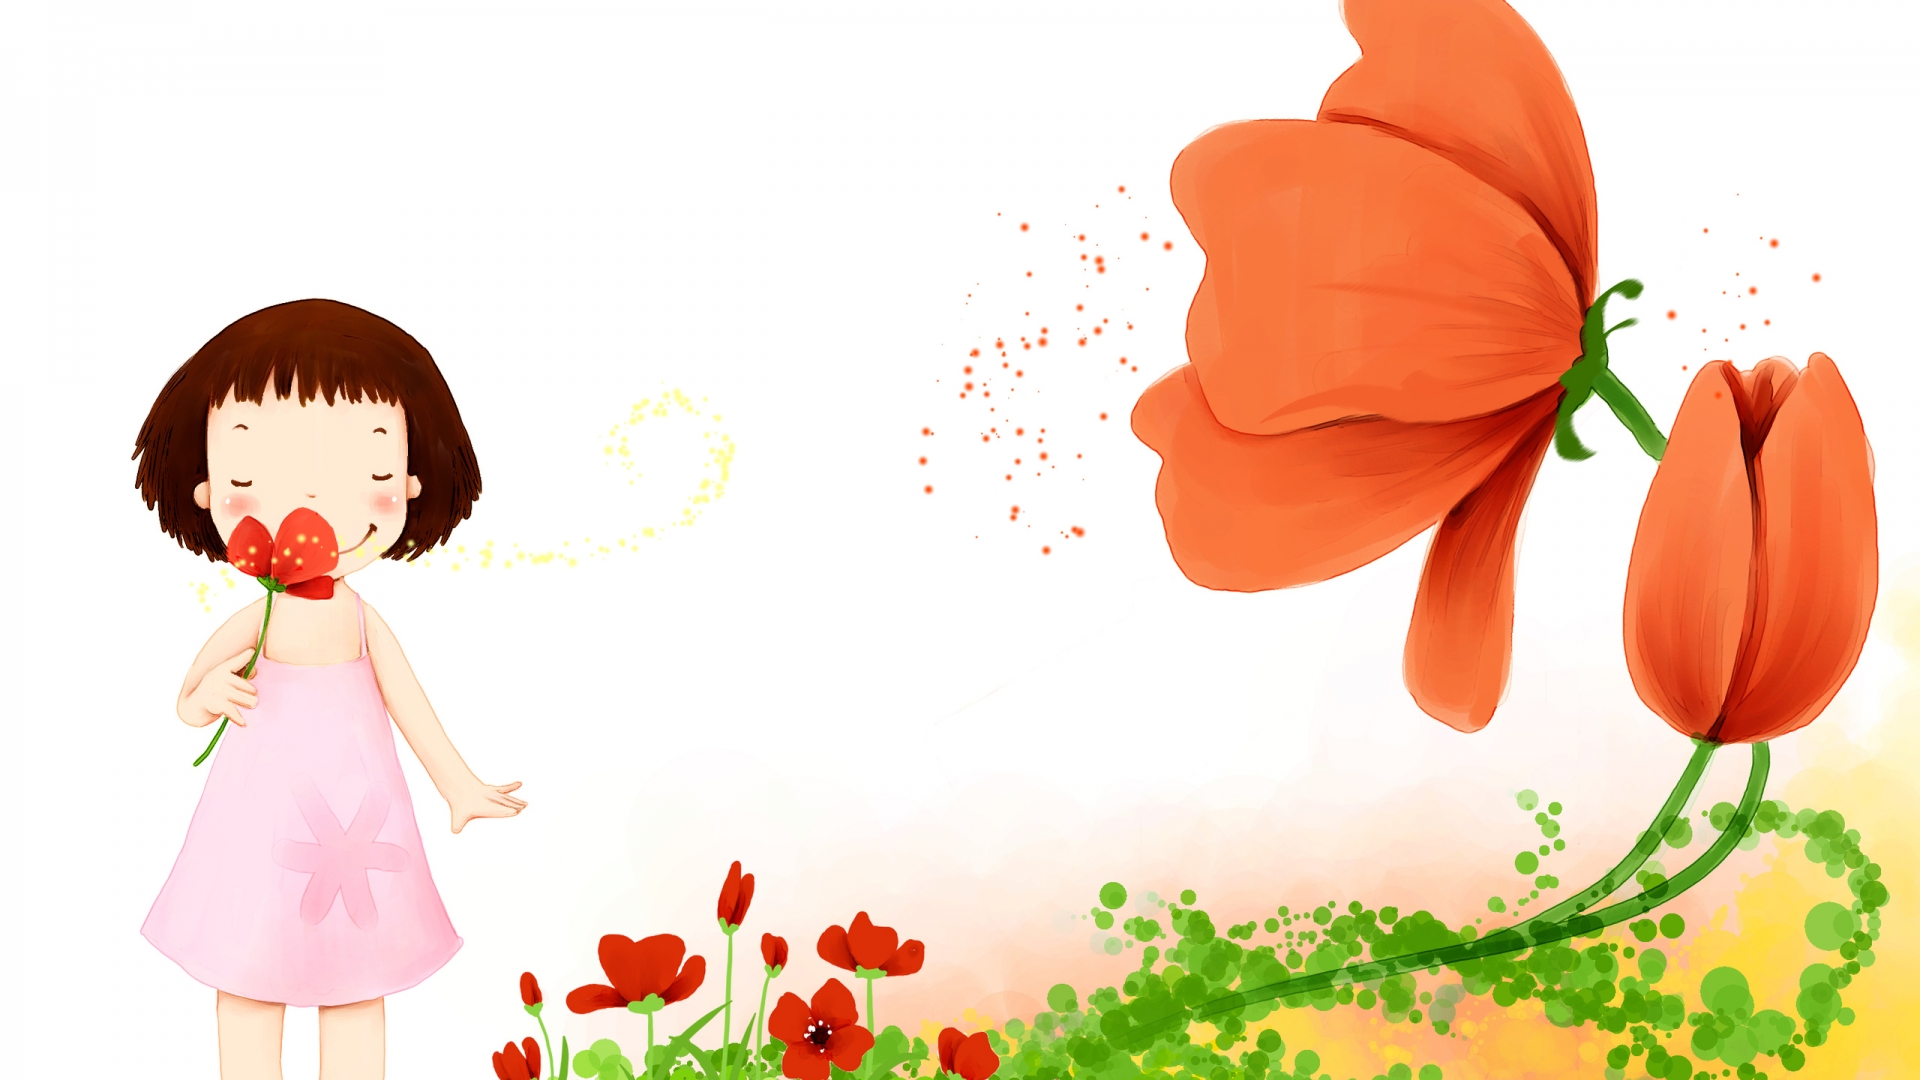 Little Girl with Flowers for 1920 x 1080 HDTV 1080p resolution